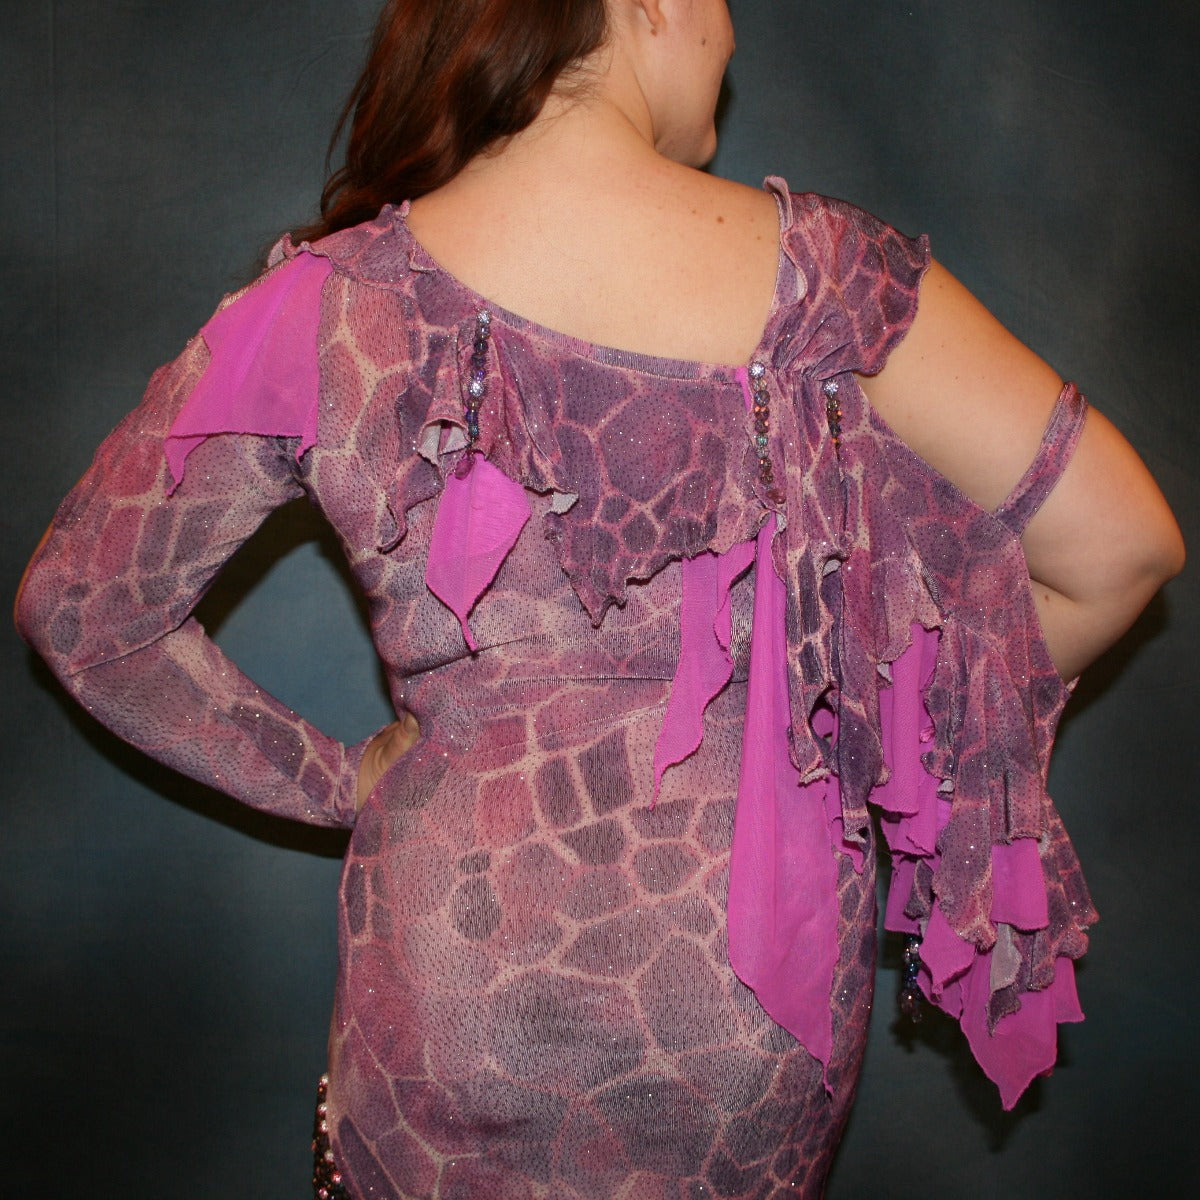 Crystal's Creations close back view of Orchid Latin/rhythm dress created of wild orchid & violet printed glitter slinky has orchid accents, flounces on one arm & skirt, embellished with Swarovski hand beading of various shades of orchid & shapes through out, is a fun & colorful Latin/rhythm dress